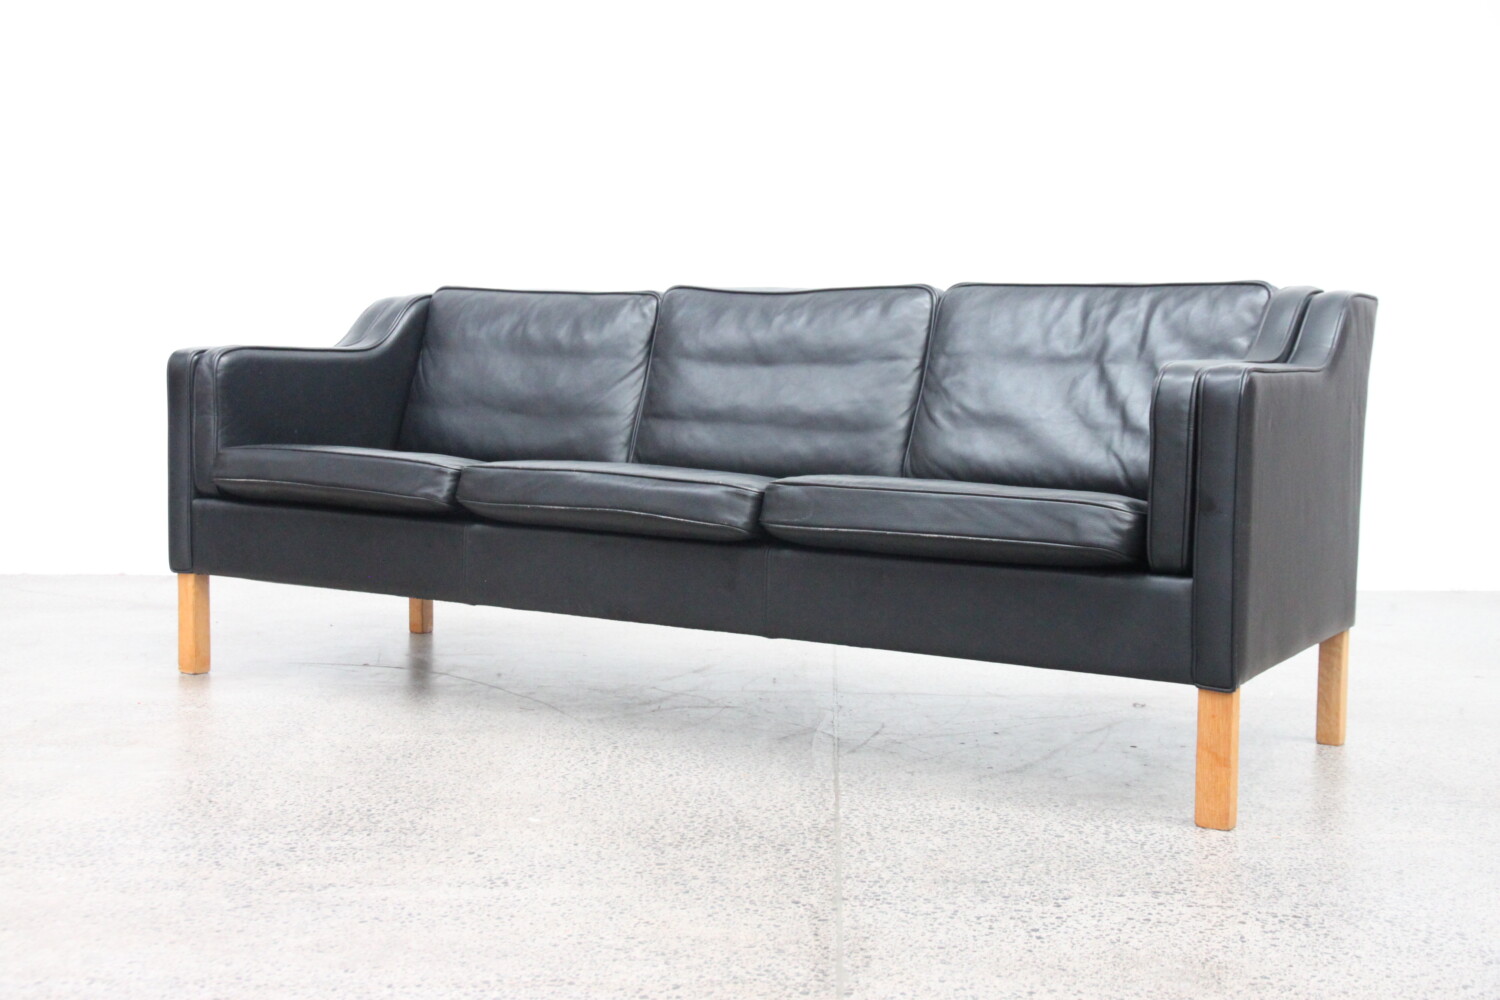 Black Leather 3 Seater Sofa sold